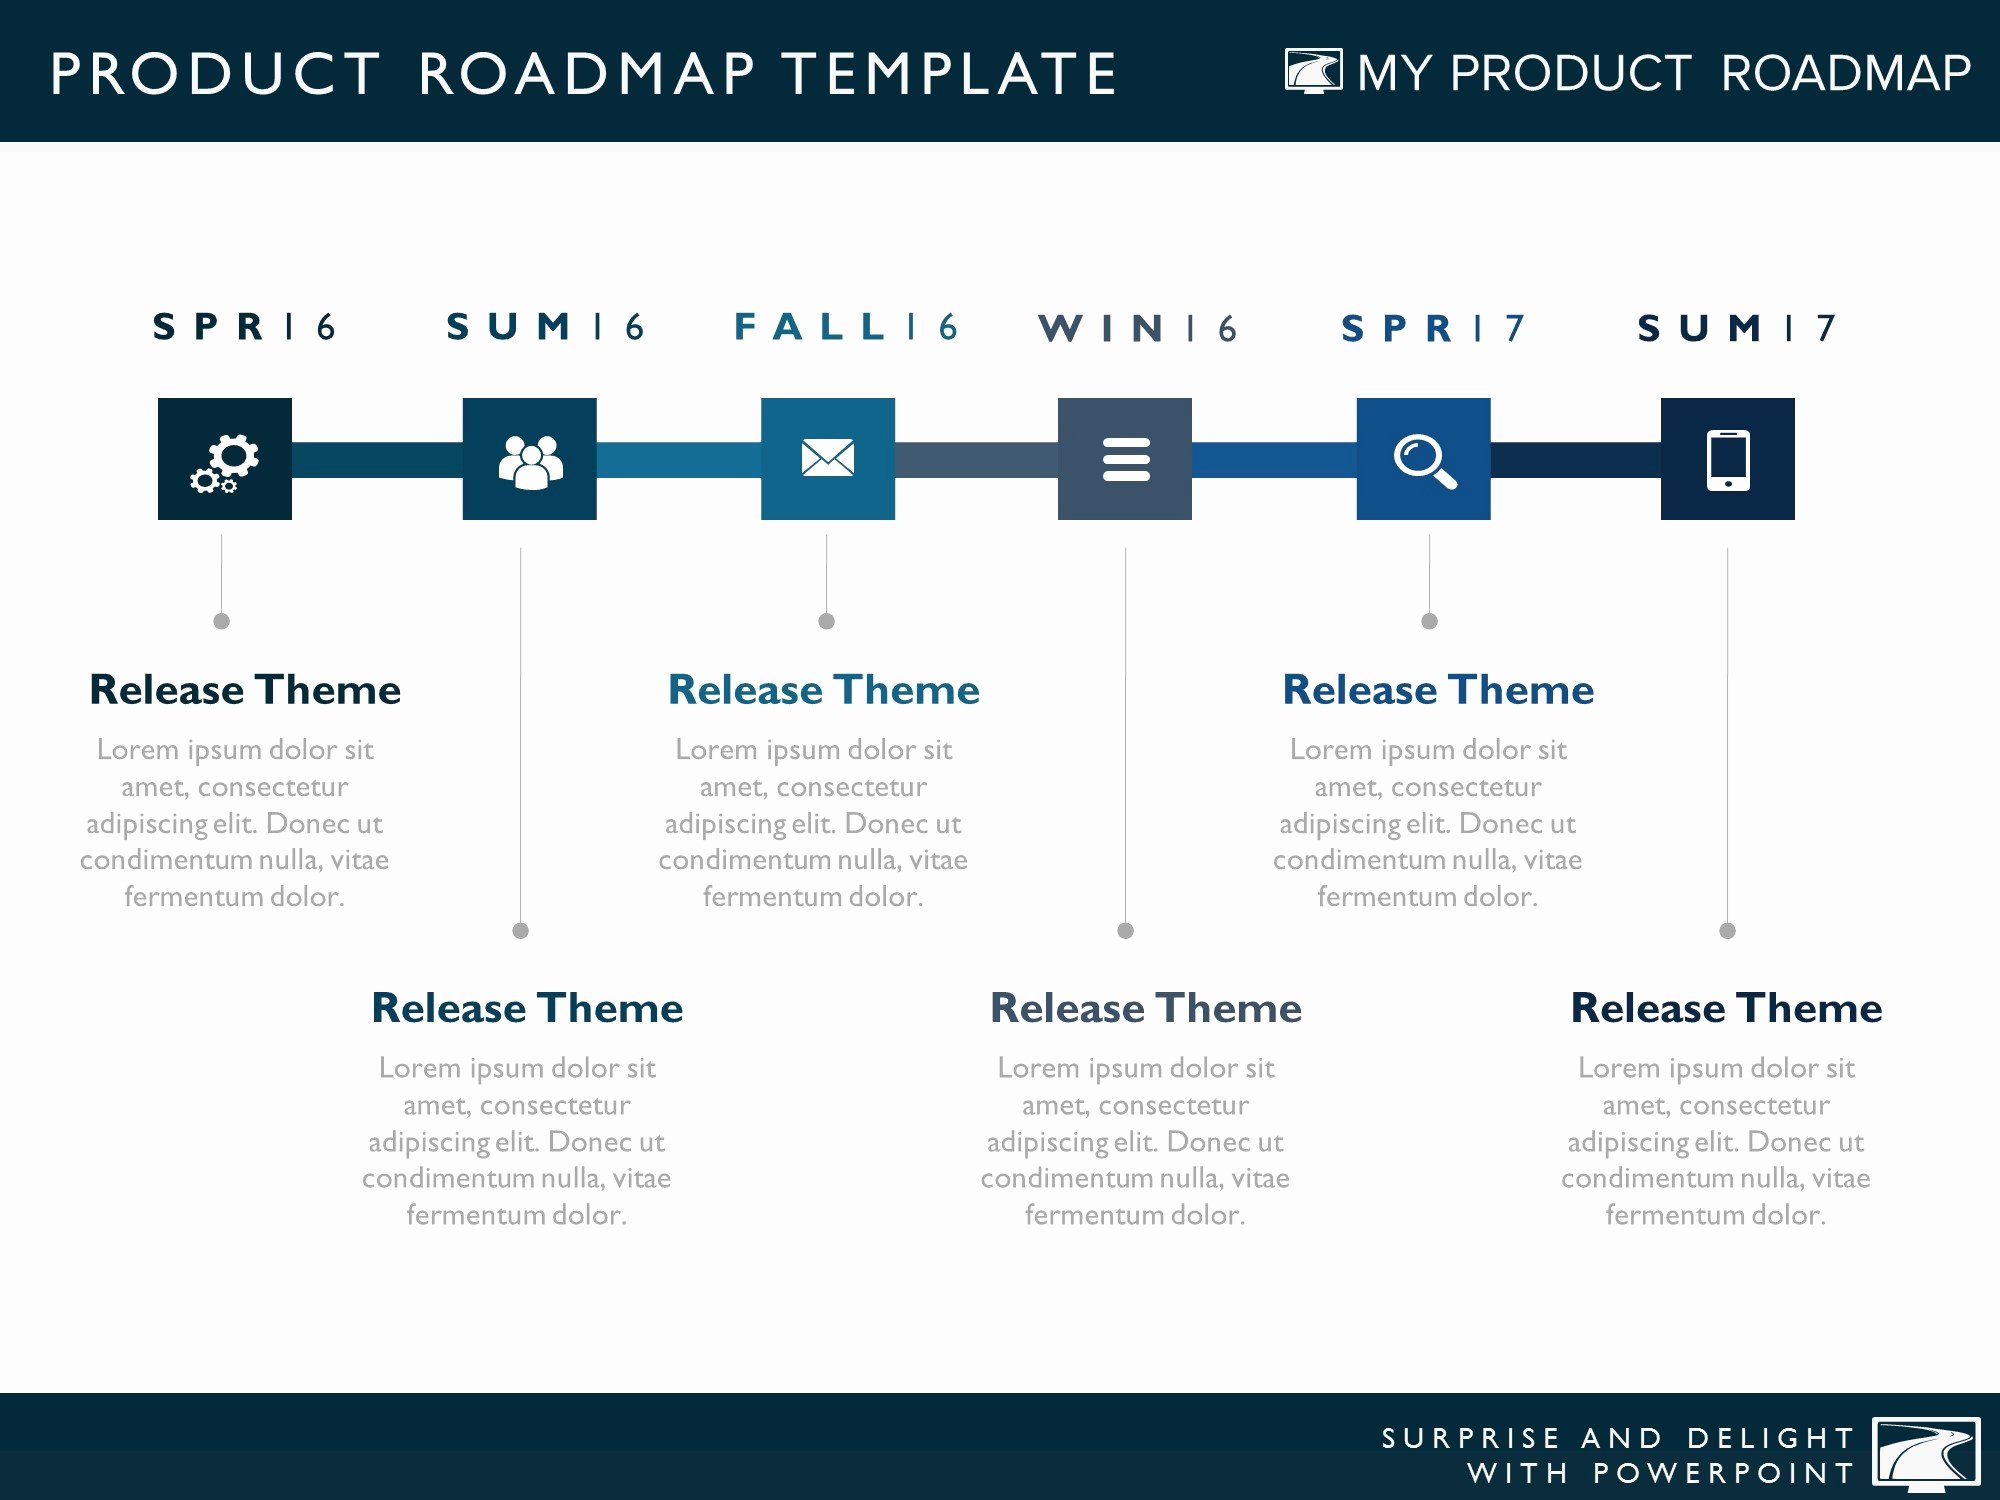 Product Roadmap Templates for Powerpoint